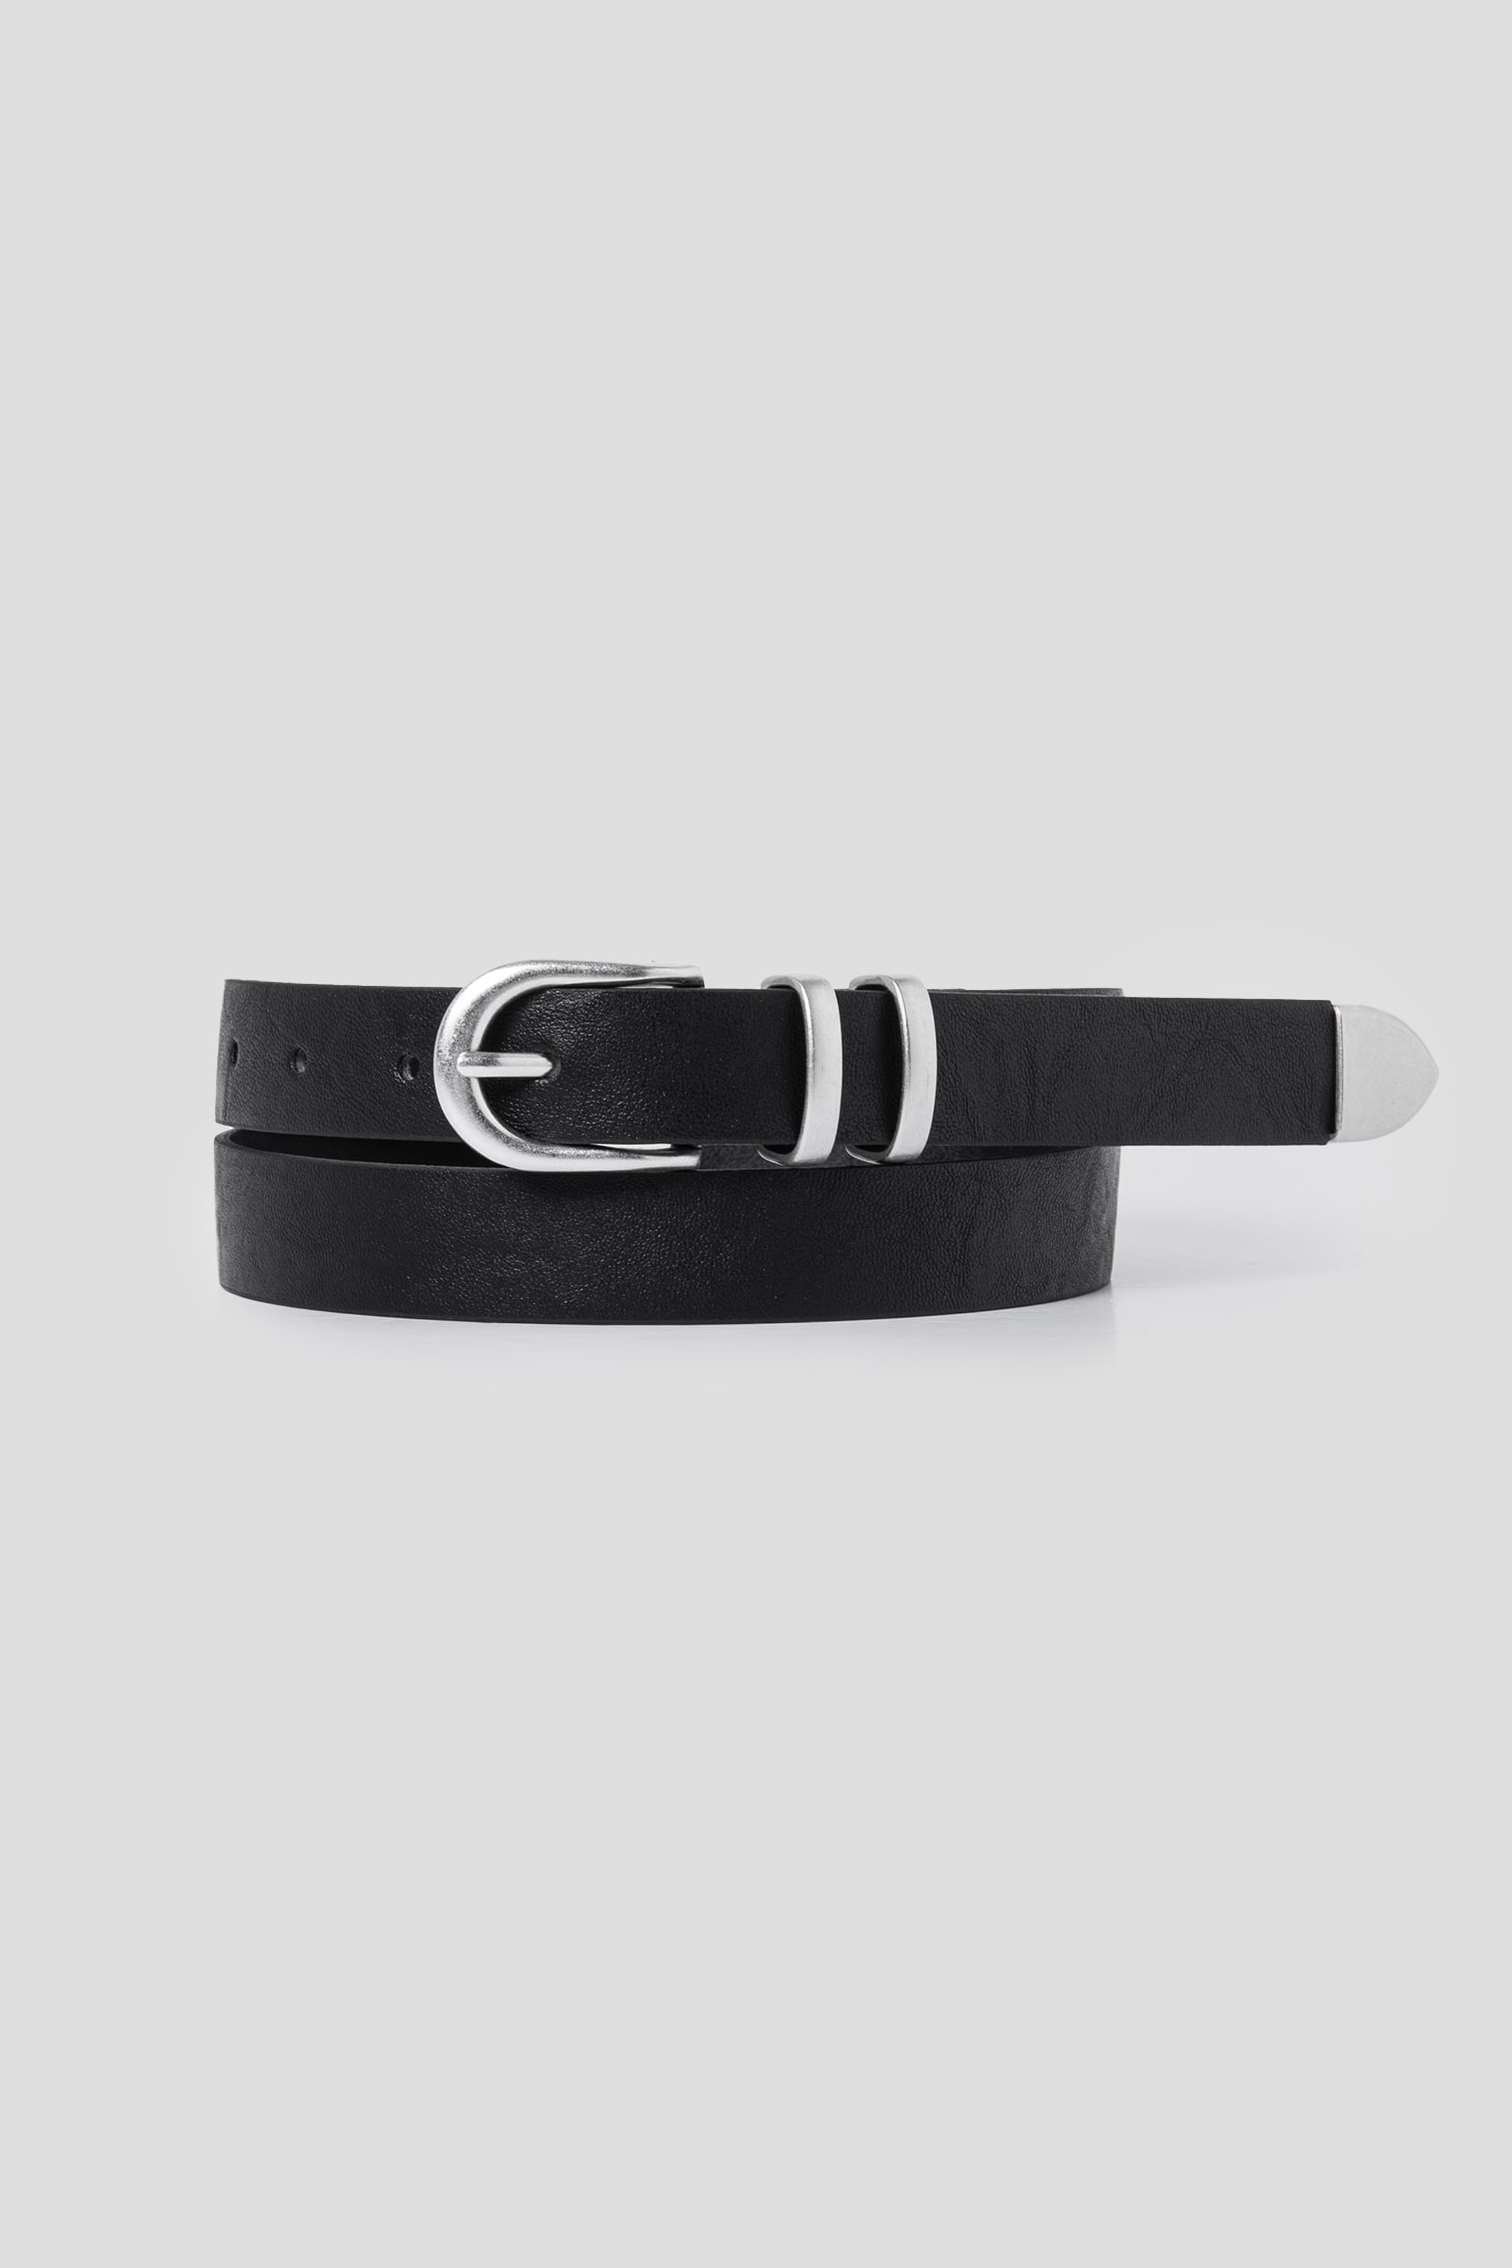 SUITUA Mens & Womens Canvas Belt with D-ring,Double Ring Belt,1 1/2